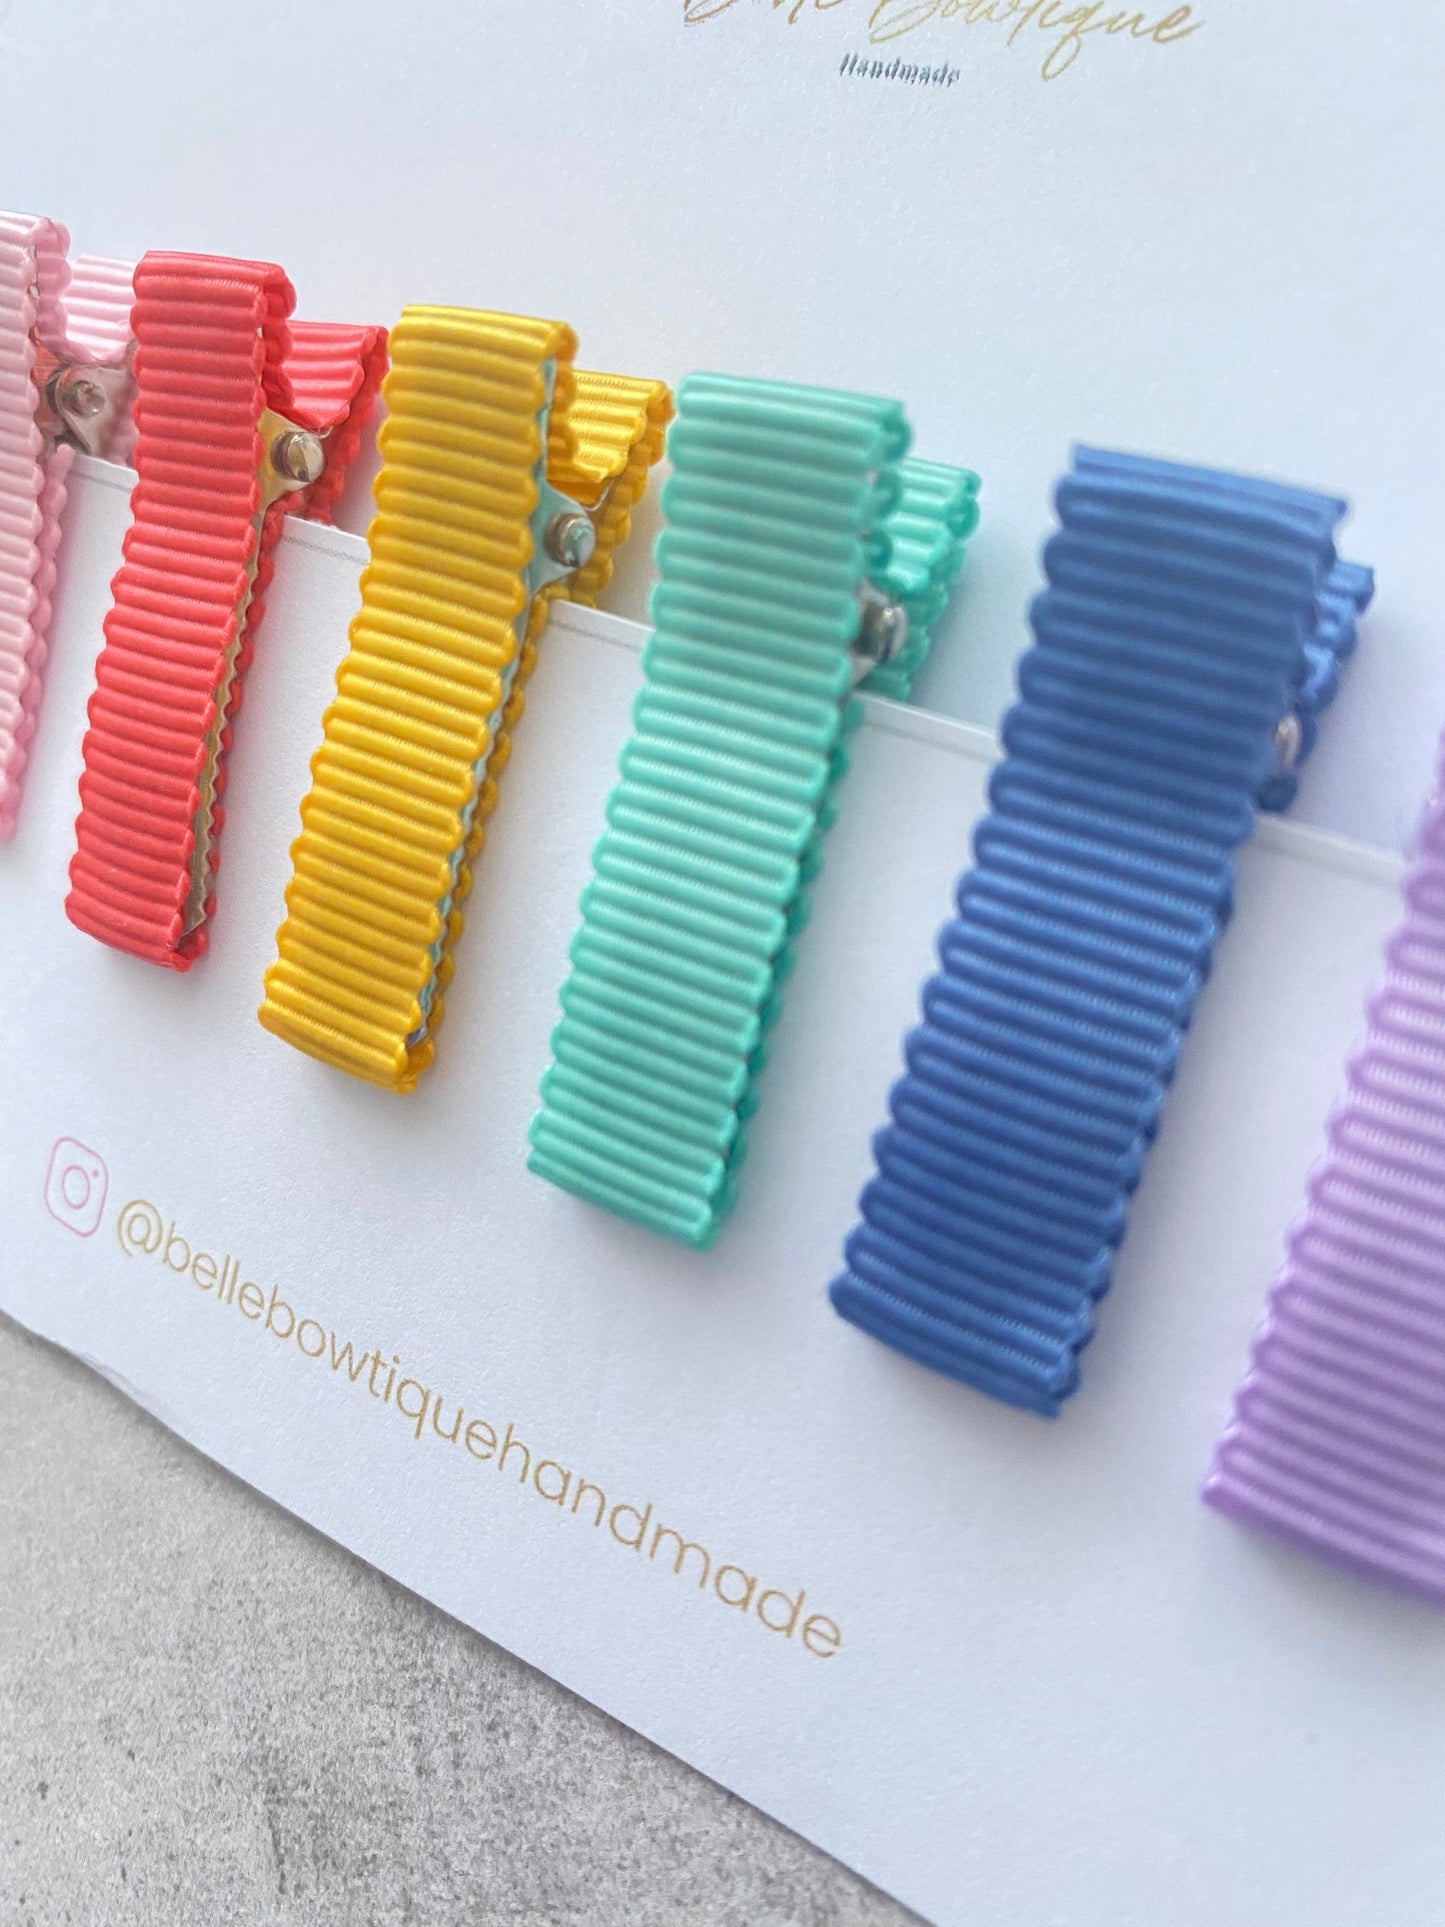 Rainbow ribbon fringe clips pack of 6 - small clips - mini clips - Clip pack - baby hair clips - toddler hair clips